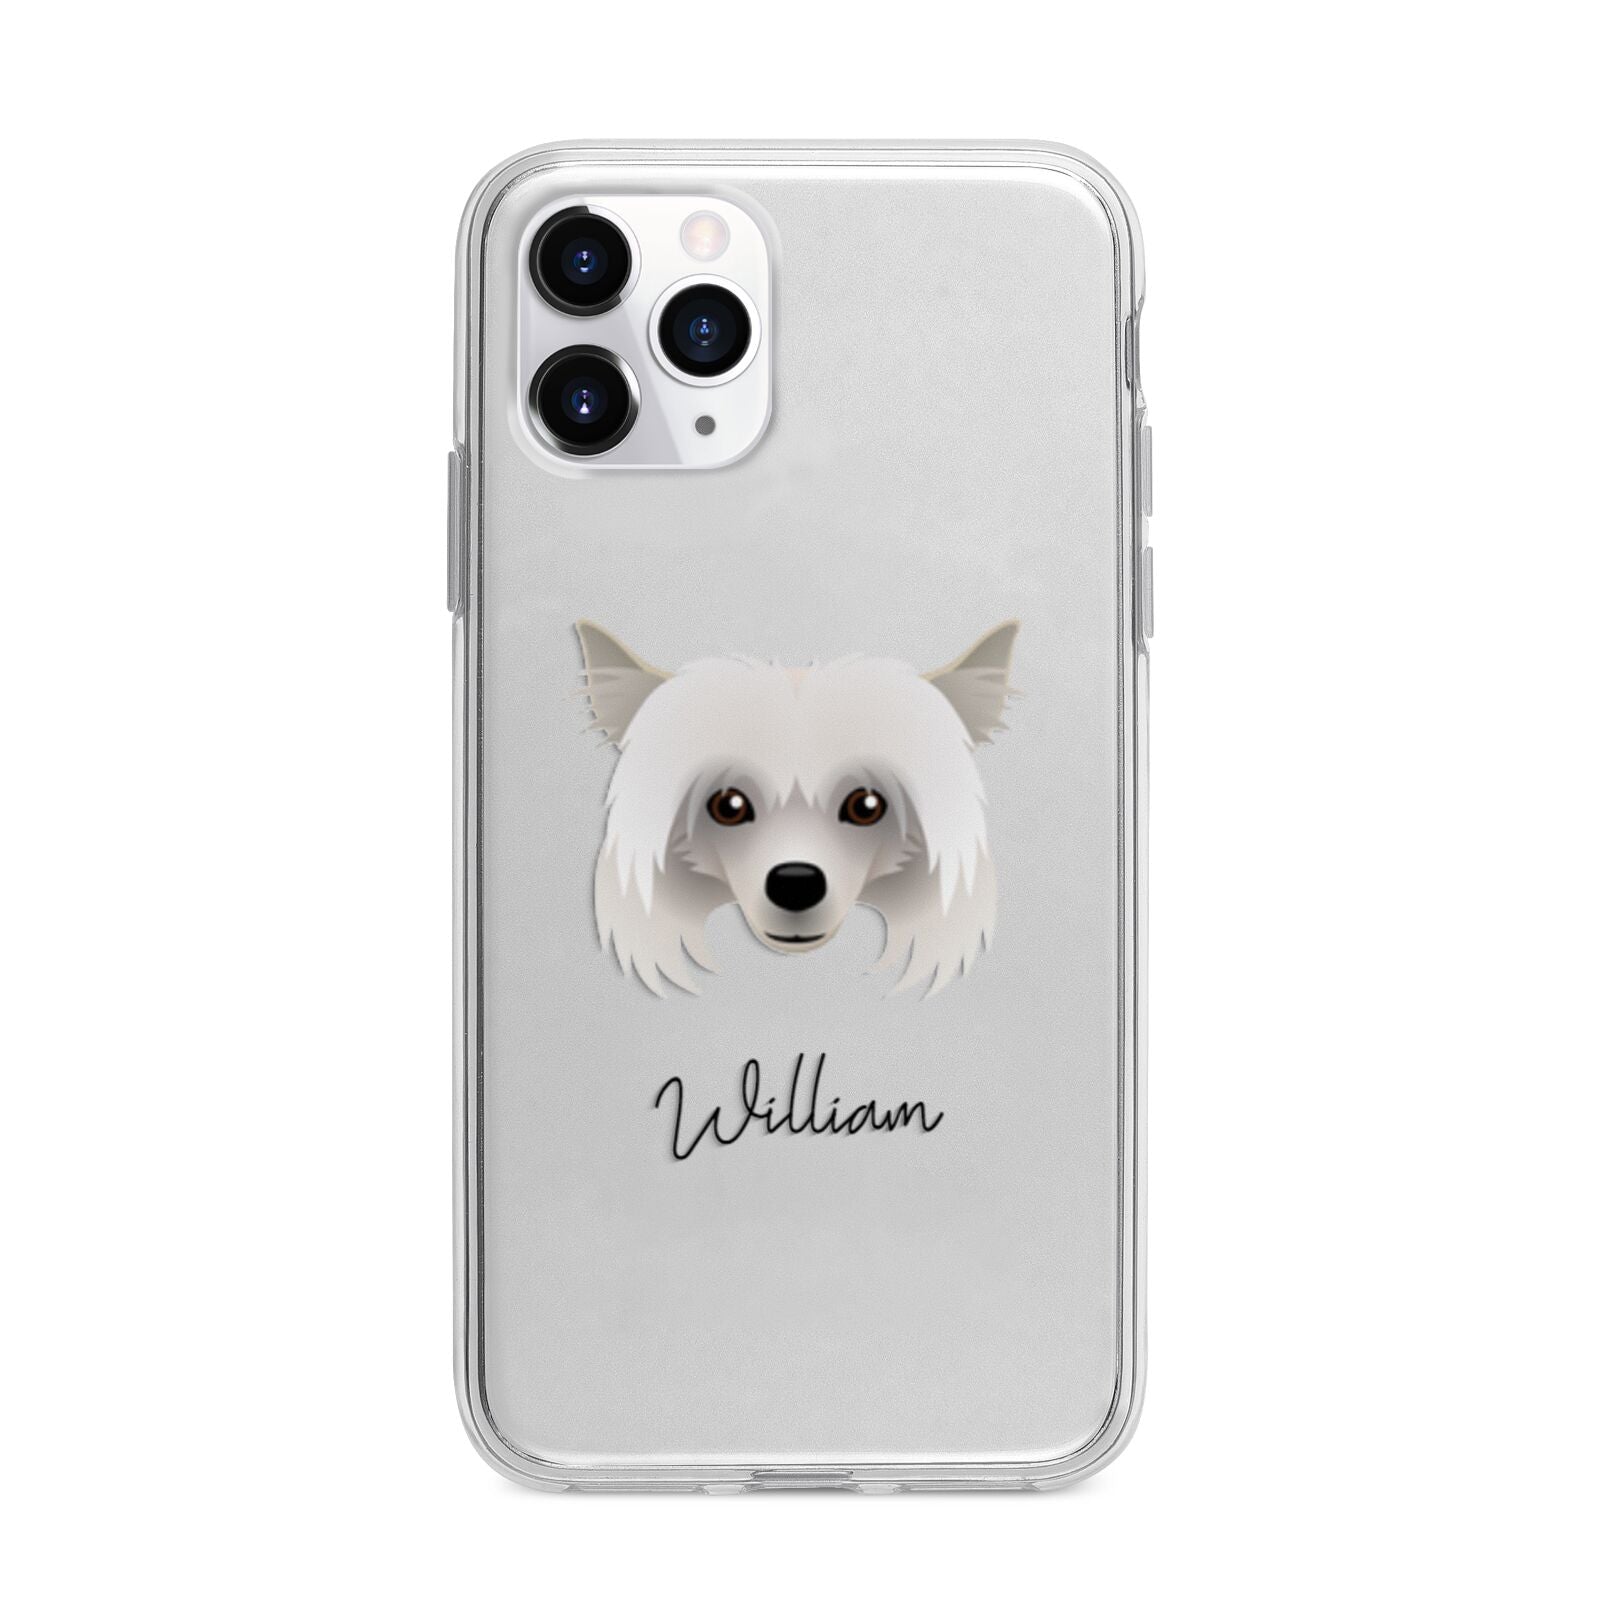 Powderpuff Chinese Crested Personalised Apple iPhone 11 Pro in Silver with Bumper Case